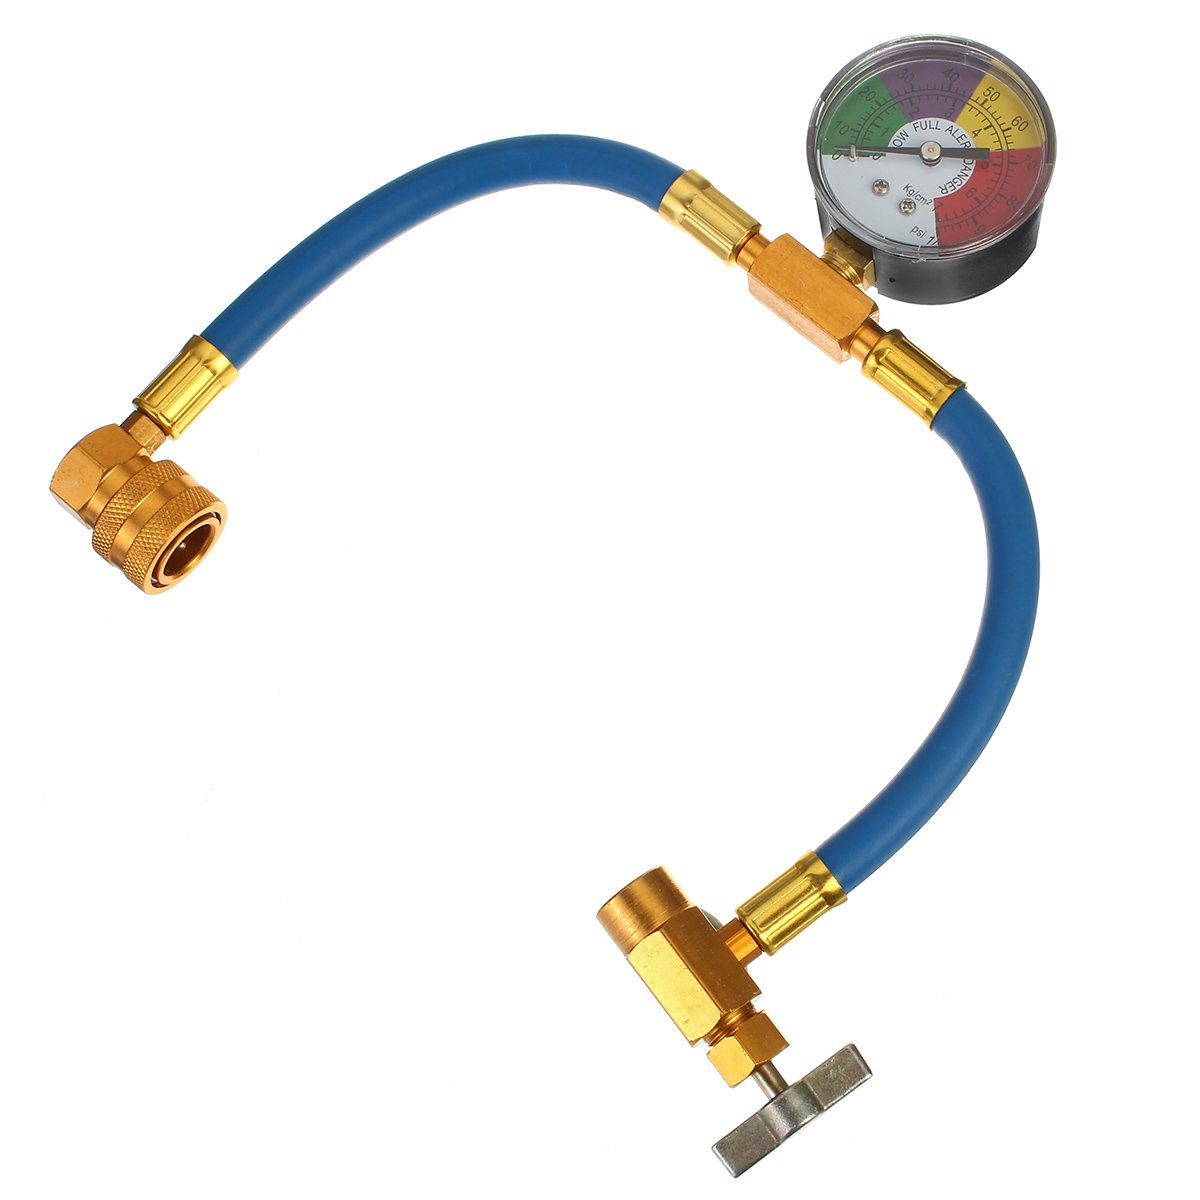 100psi-Air-Conditioning-Recharge-Hose-with-Pressure-Gauge-AC-R134A-12-Inch-Refrigerant-Recharge-Meas-1701031-2